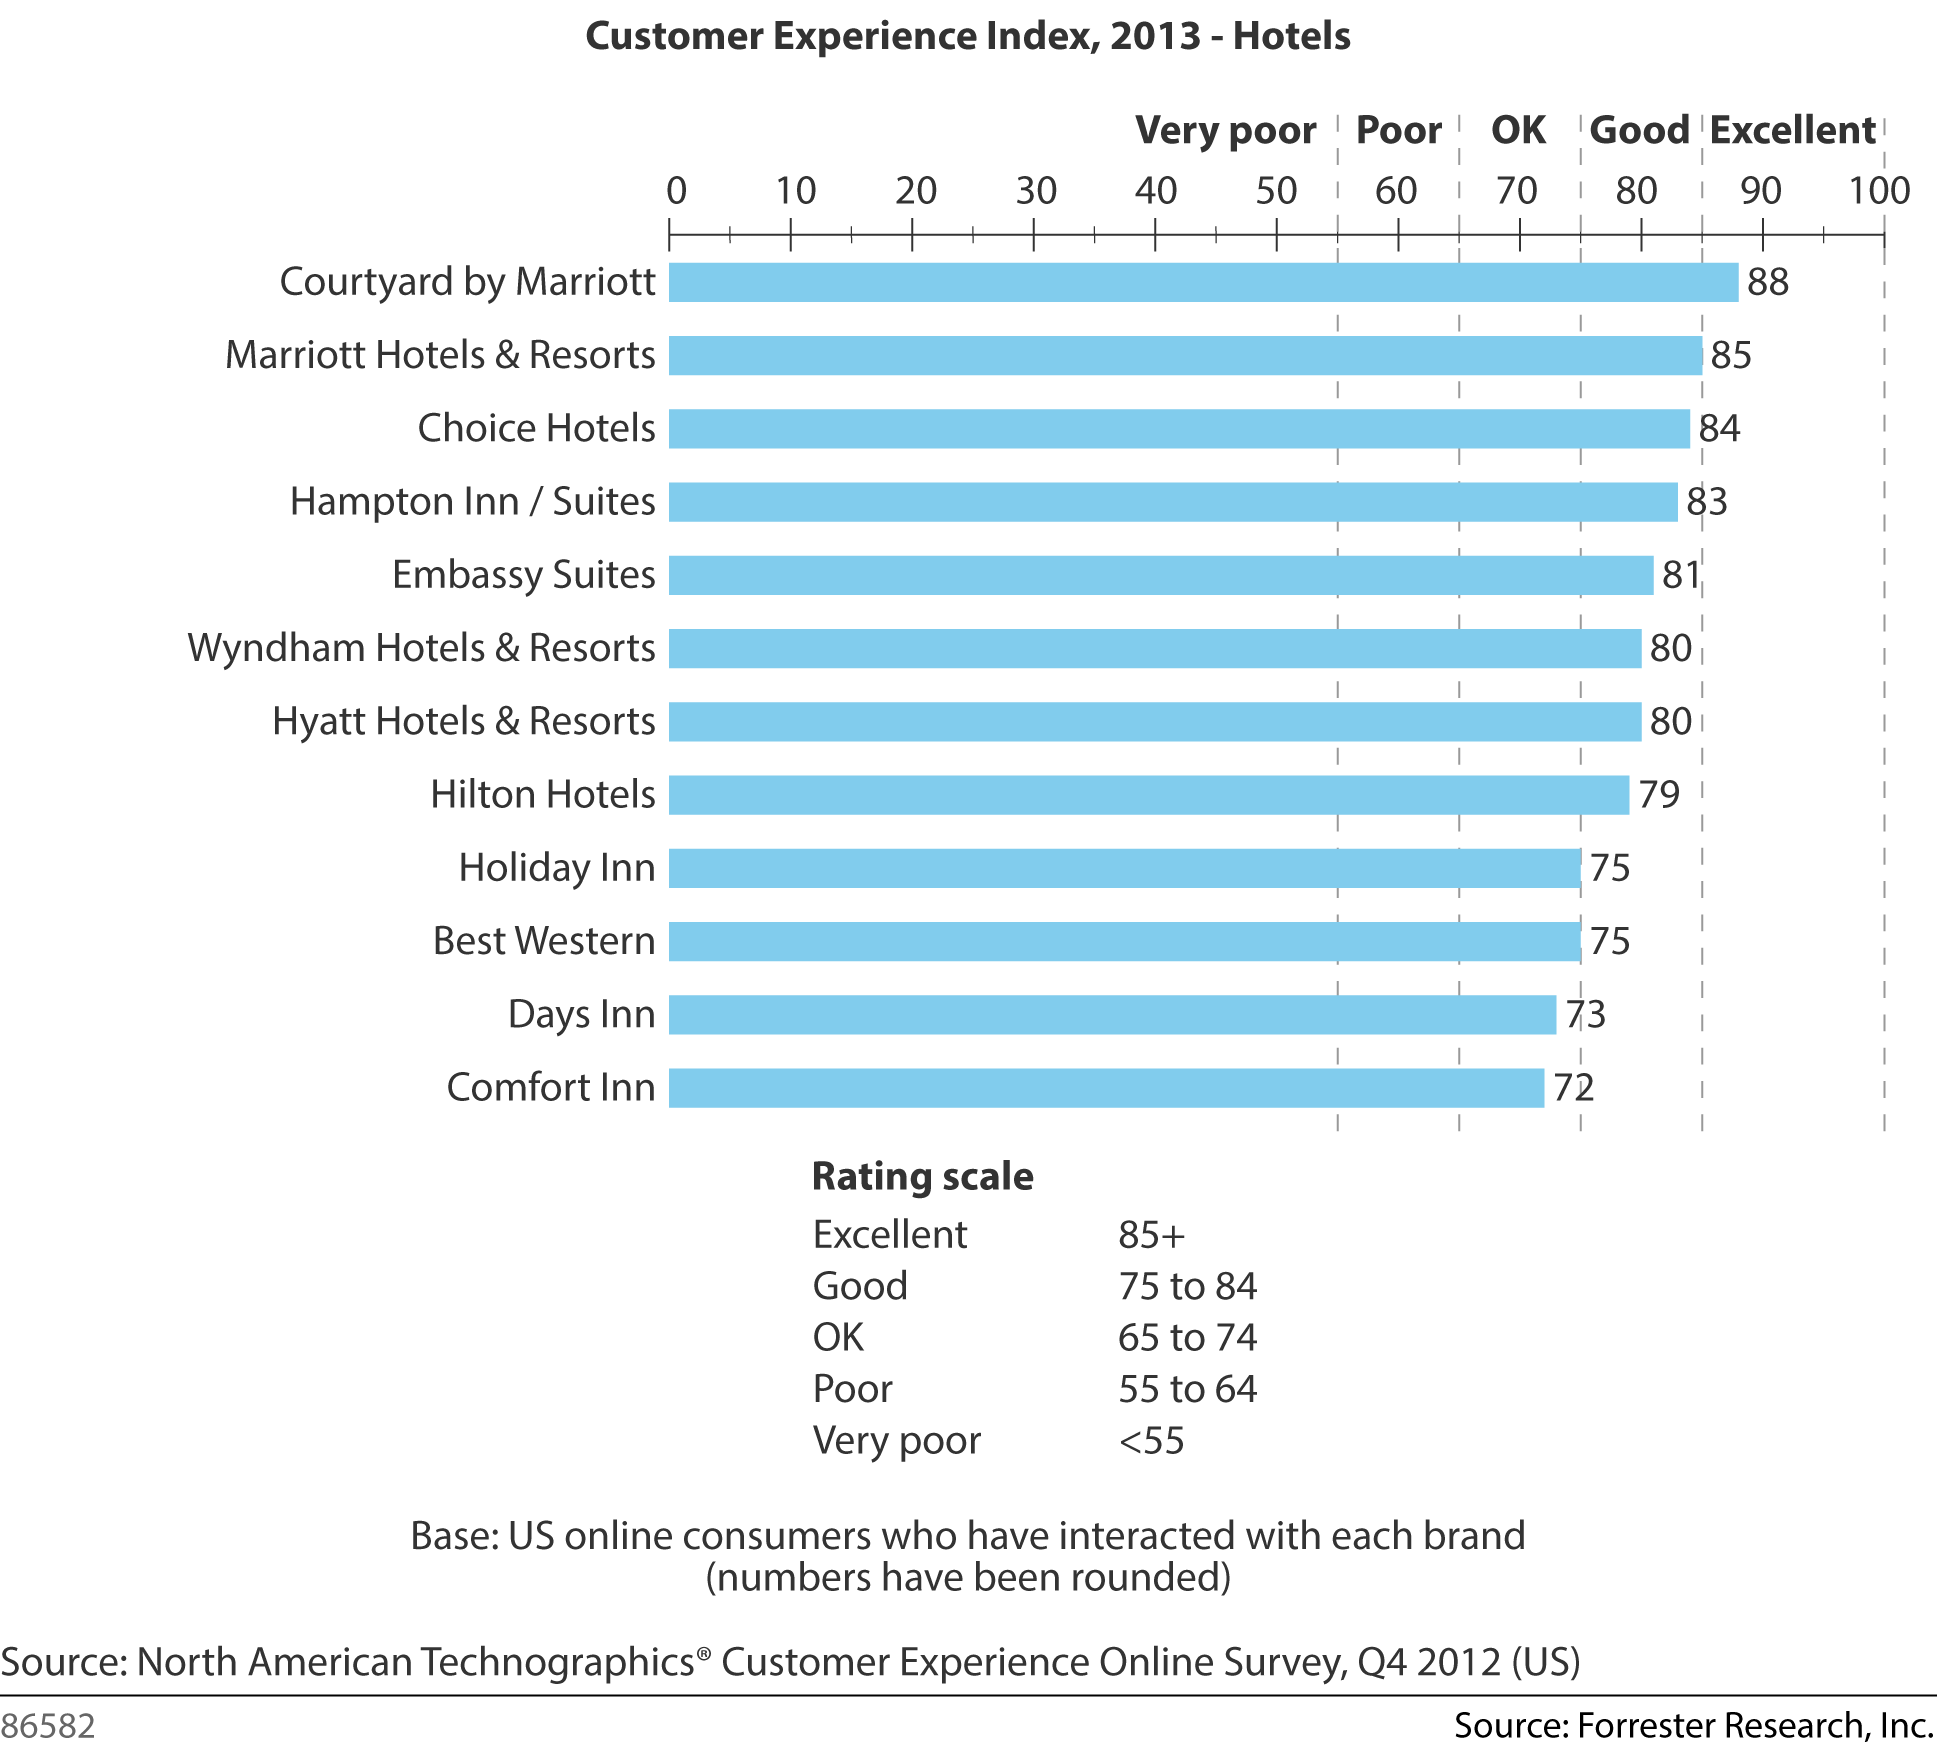 Forrester Customer Experience Index - 2013 - Hotels